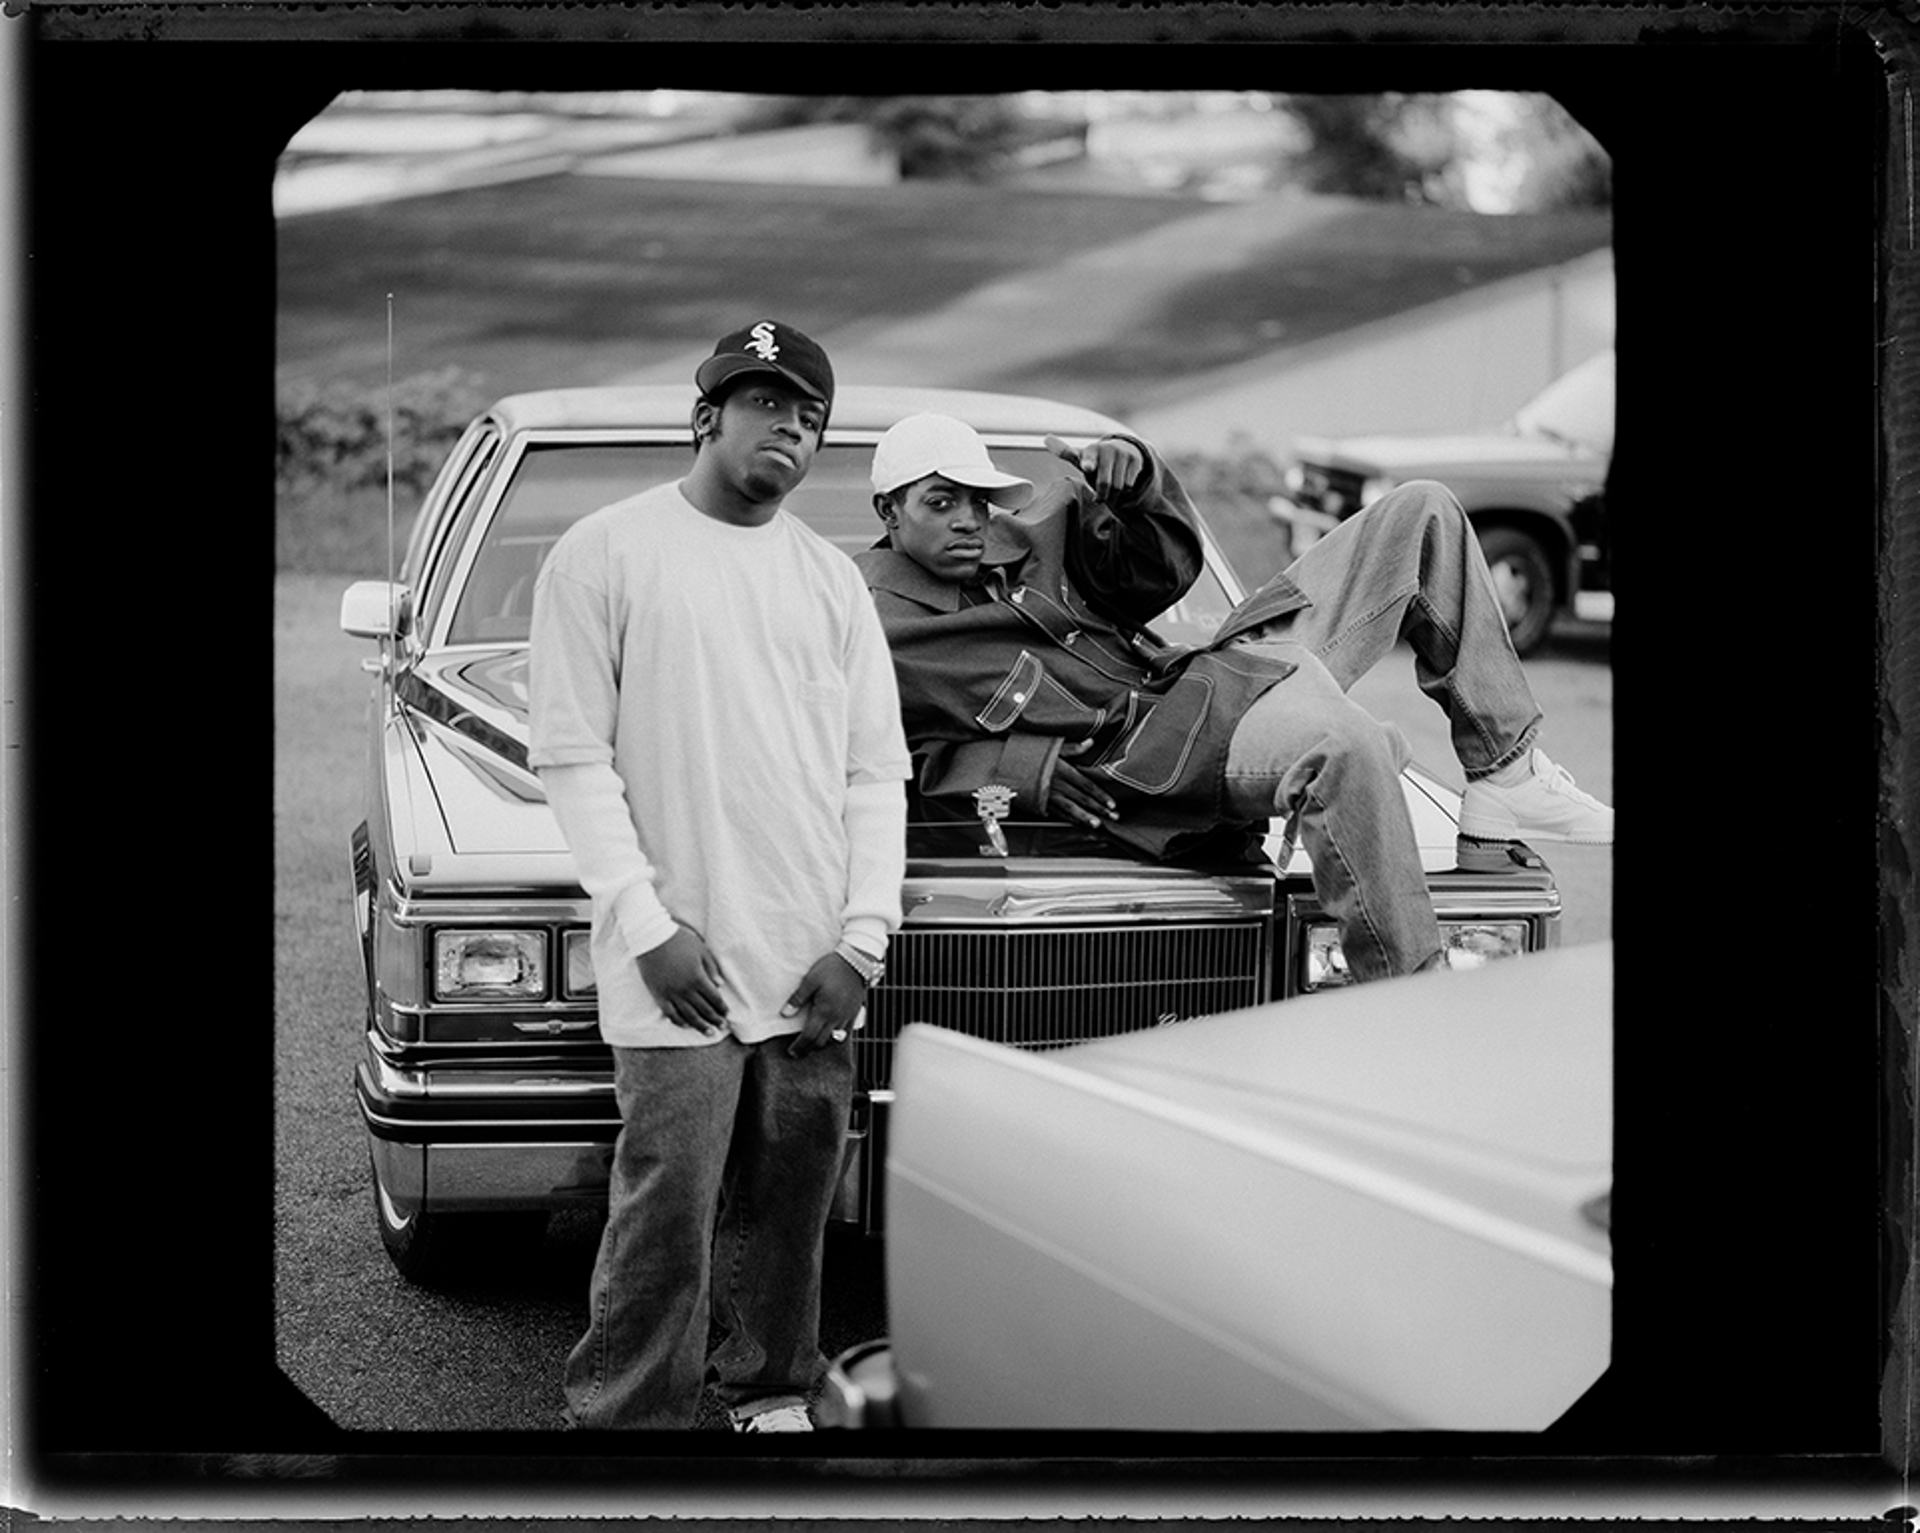 93125 Outkast On the Cadillac BW by Timothy White